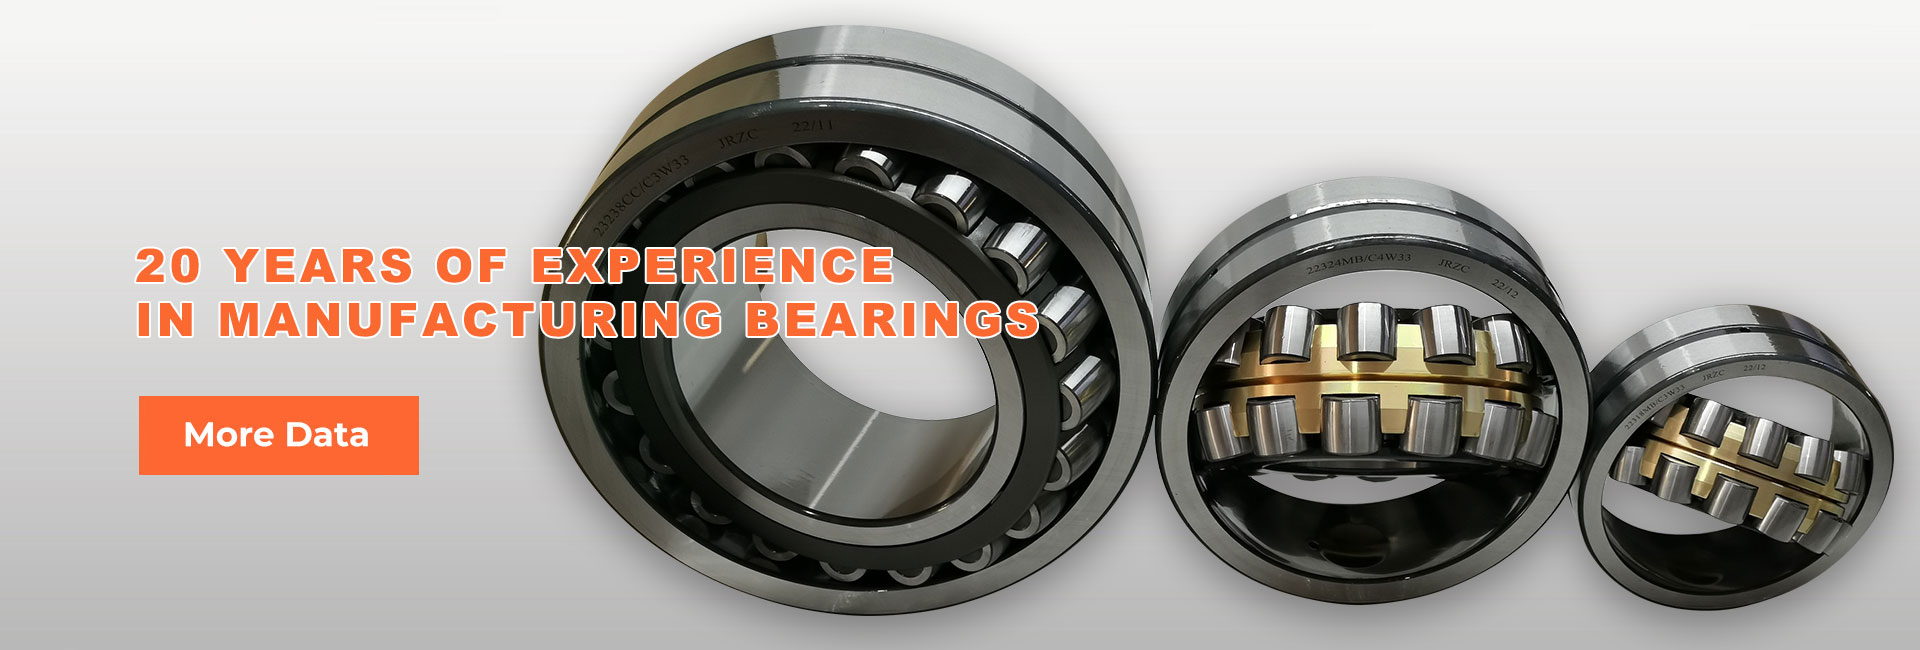 20 YEARS OF EXPERIENCE IN MANUFACTURING BEARINGS